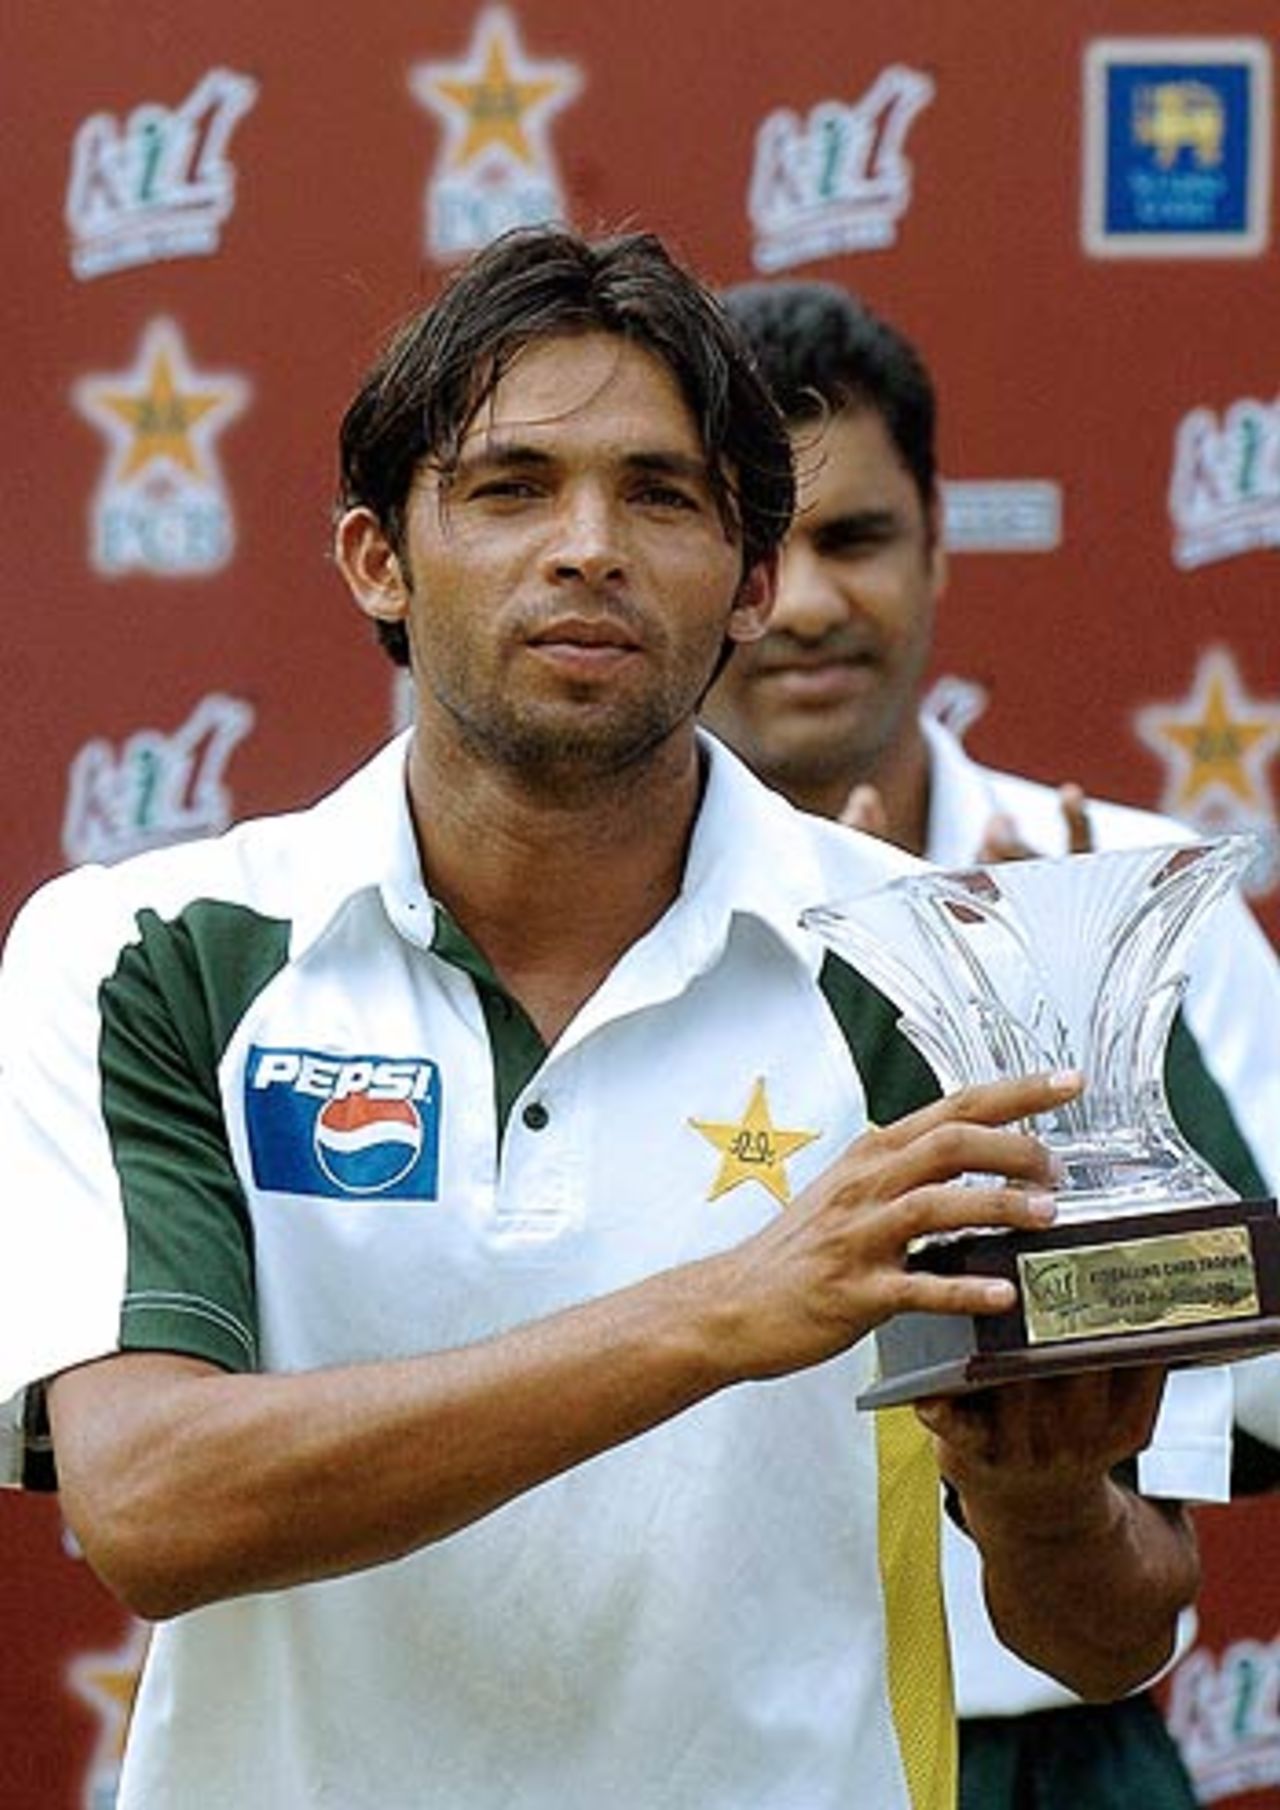 Mohammad Asif poses with his Man-of-the-Match award, Sri Lanka v Pakistan, 2nd Test, Kandy, 3rd day, April 5, 2006